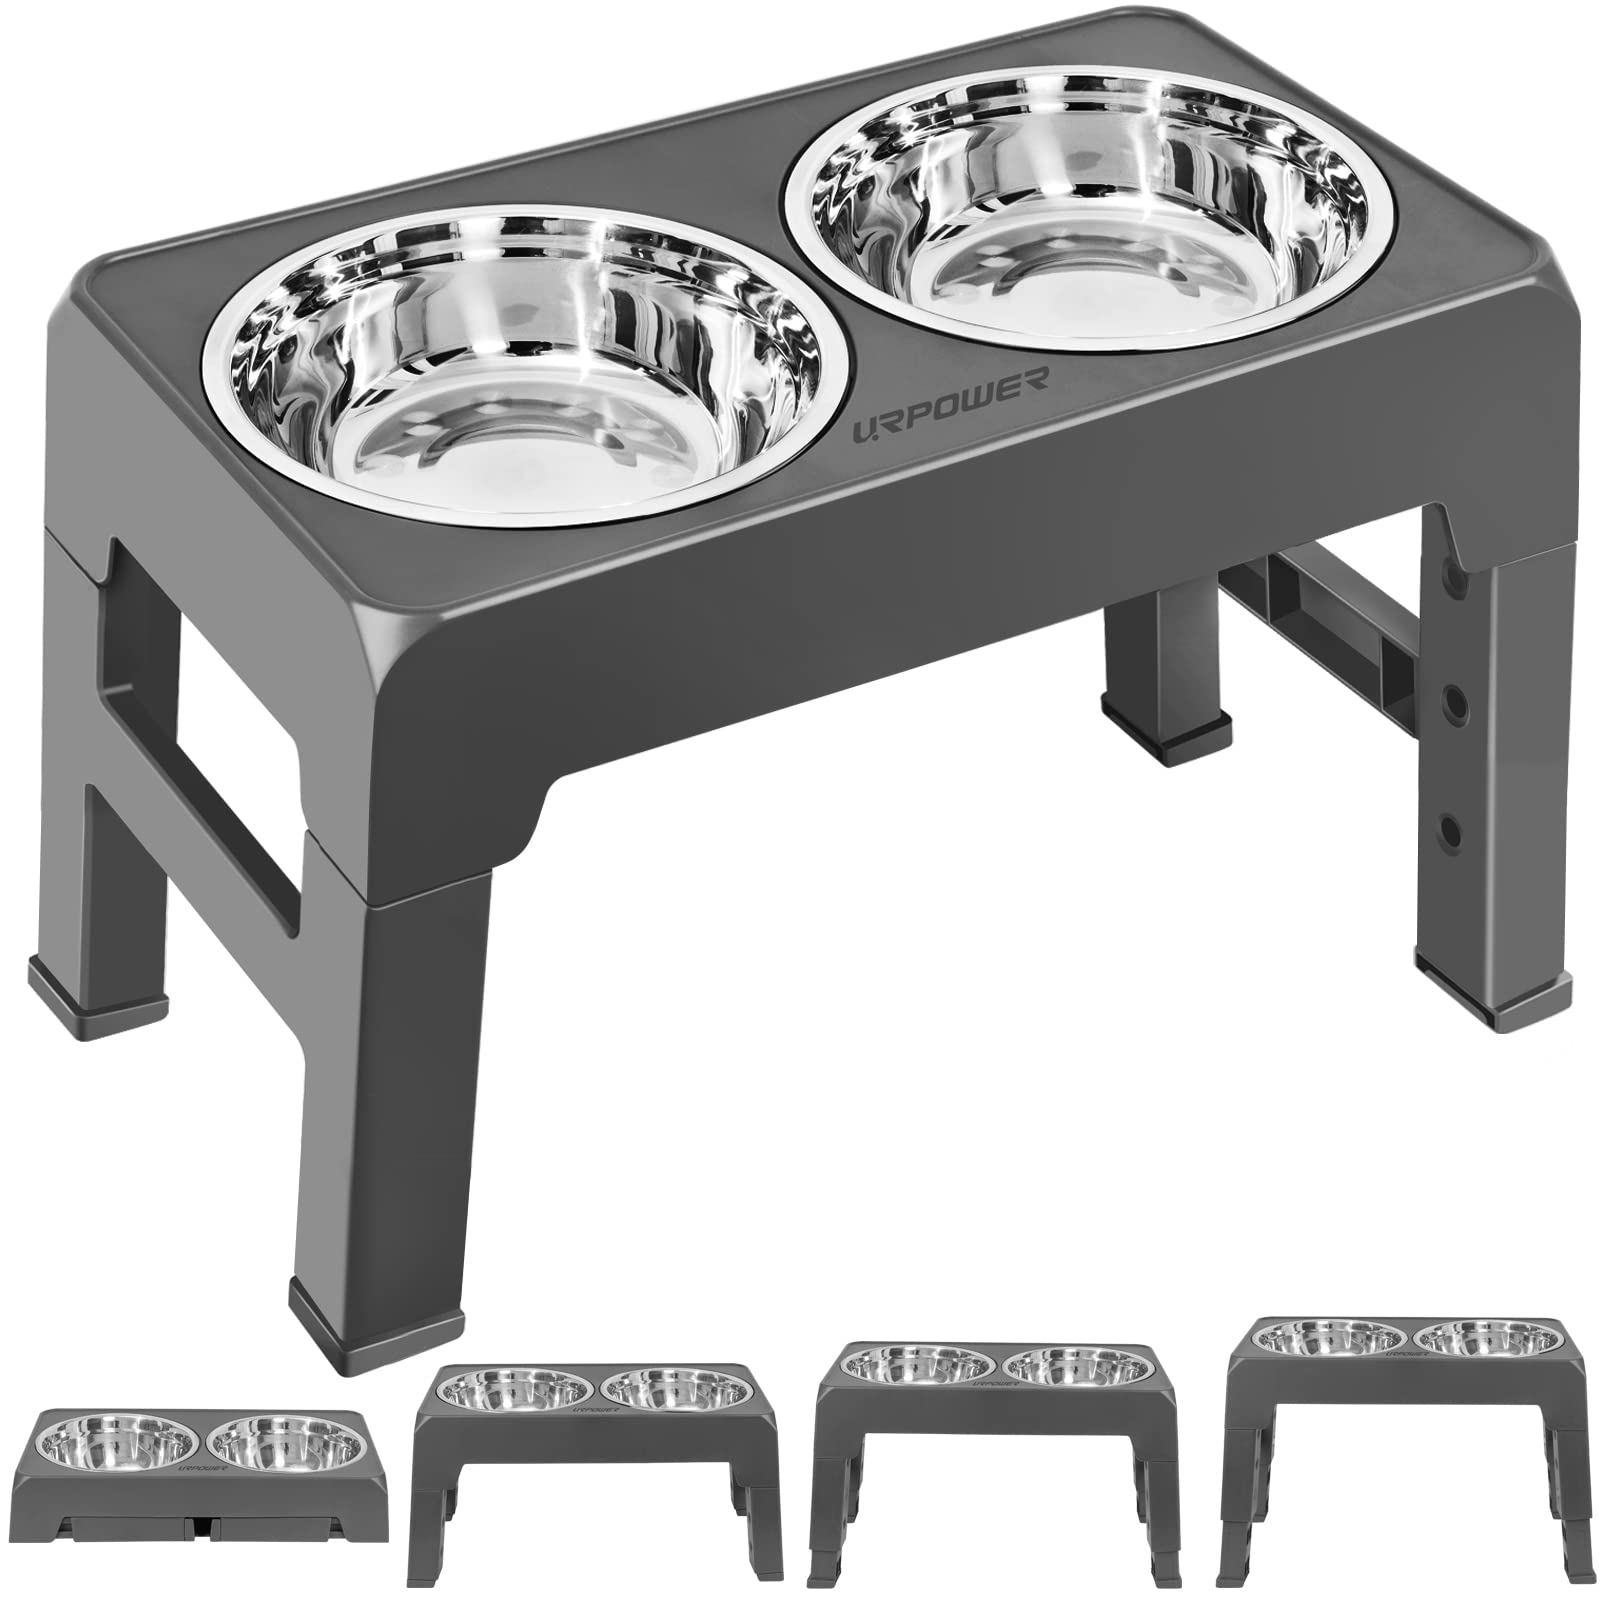 URPOWER Elevated Dog Bowls 4 Height Adjustable Raised Dog Bowl with 2  Stainless Steel Dog Food Bowls Non-Slip Dog Bowl Stand Adjusts to 3.2, 8.7,  10.2, 11.8 for Small Medium Large Dogs and Pets Grey